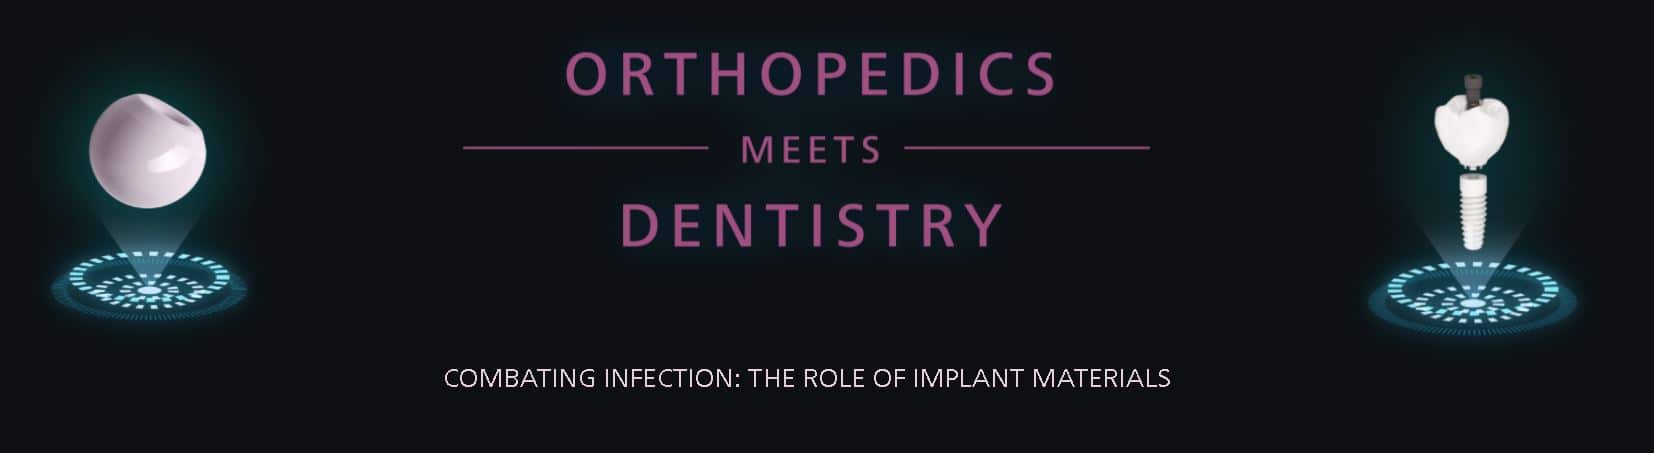 Combating Infection - The Role of Implant Materials